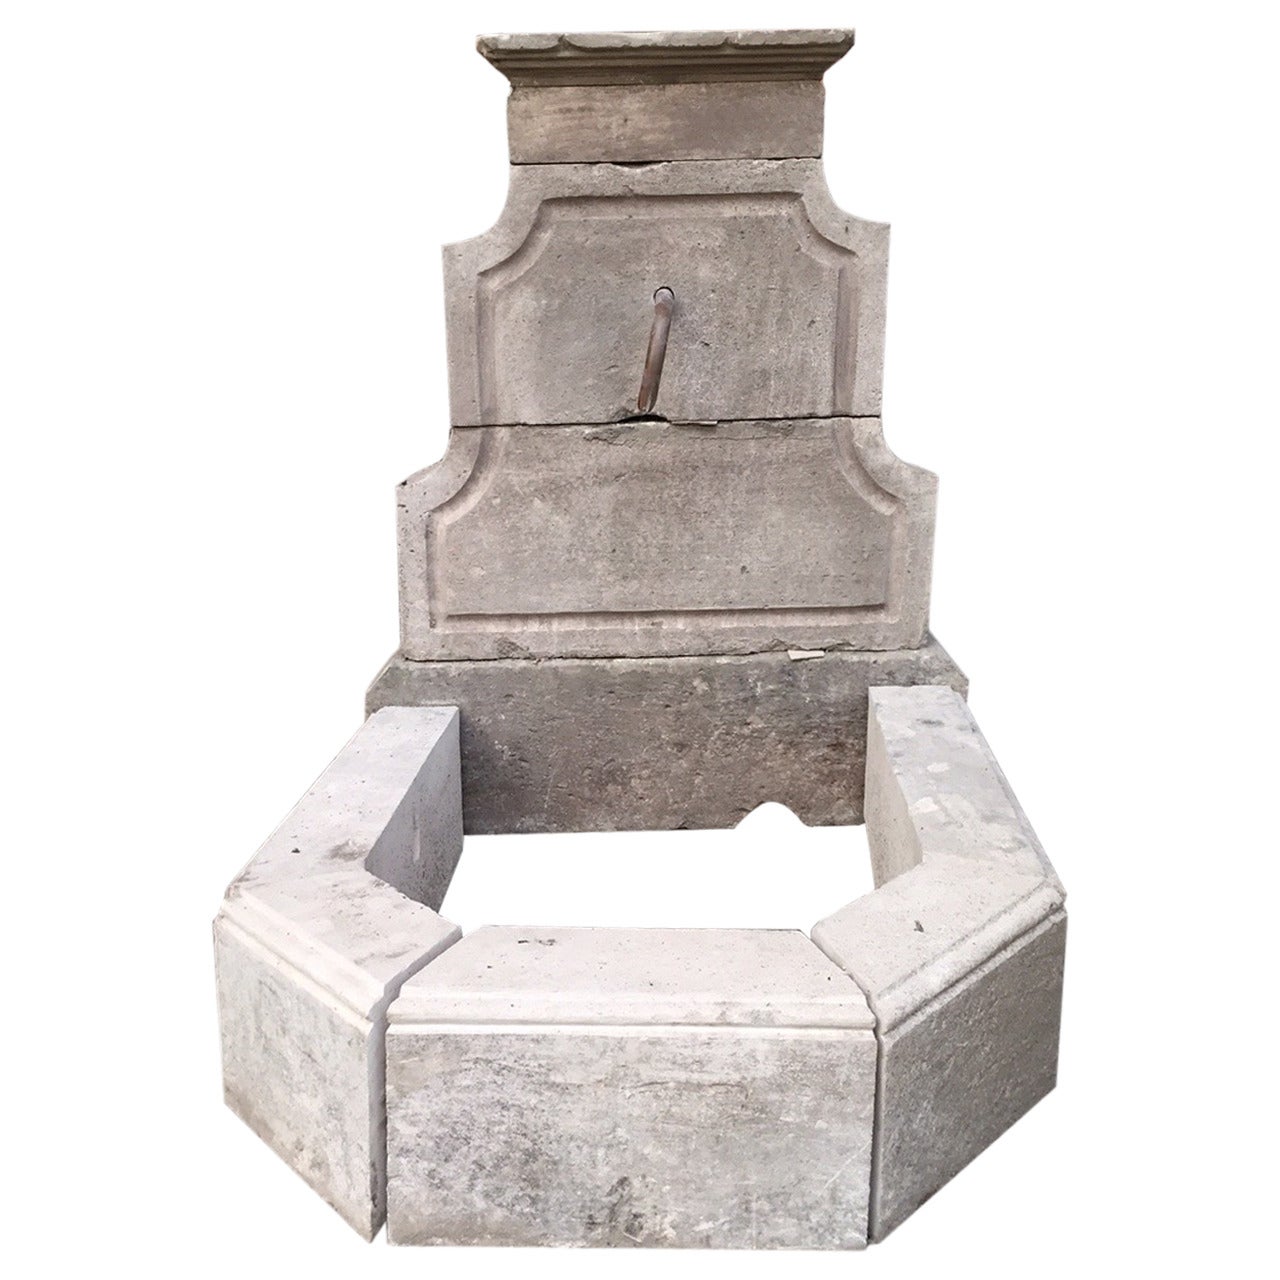 French Louis XIV Style Fountain Antique Limestone, 20th Century Provence, France